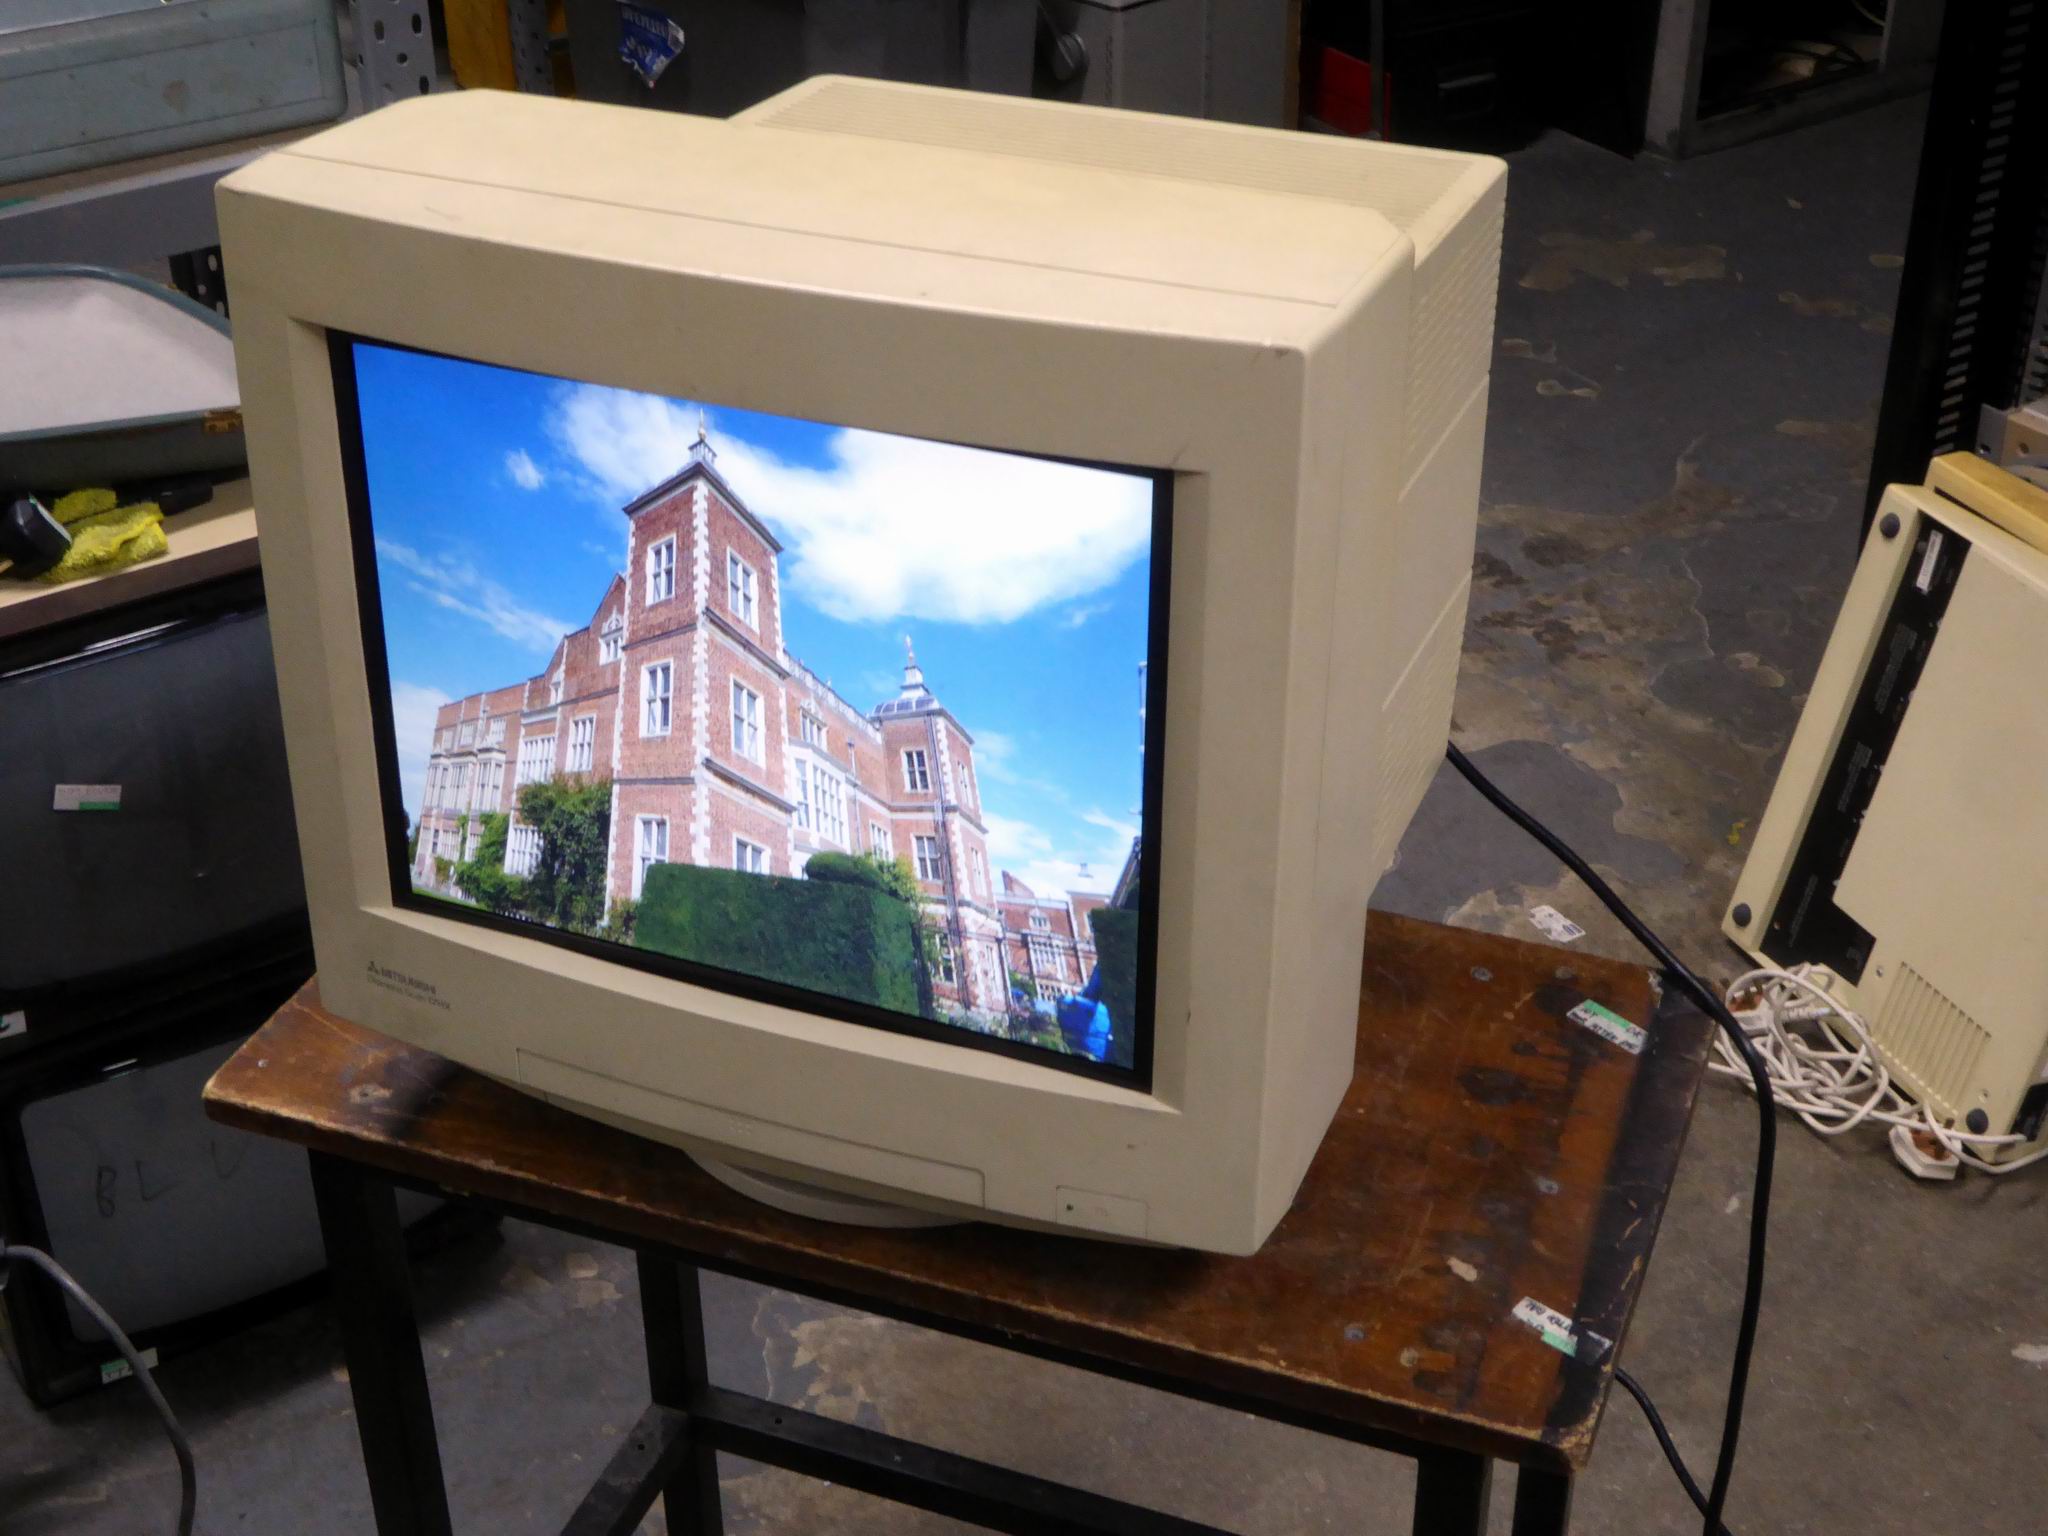 Fake CRT style monitor with inbuilt LCD/TFT flat screen Electro Props